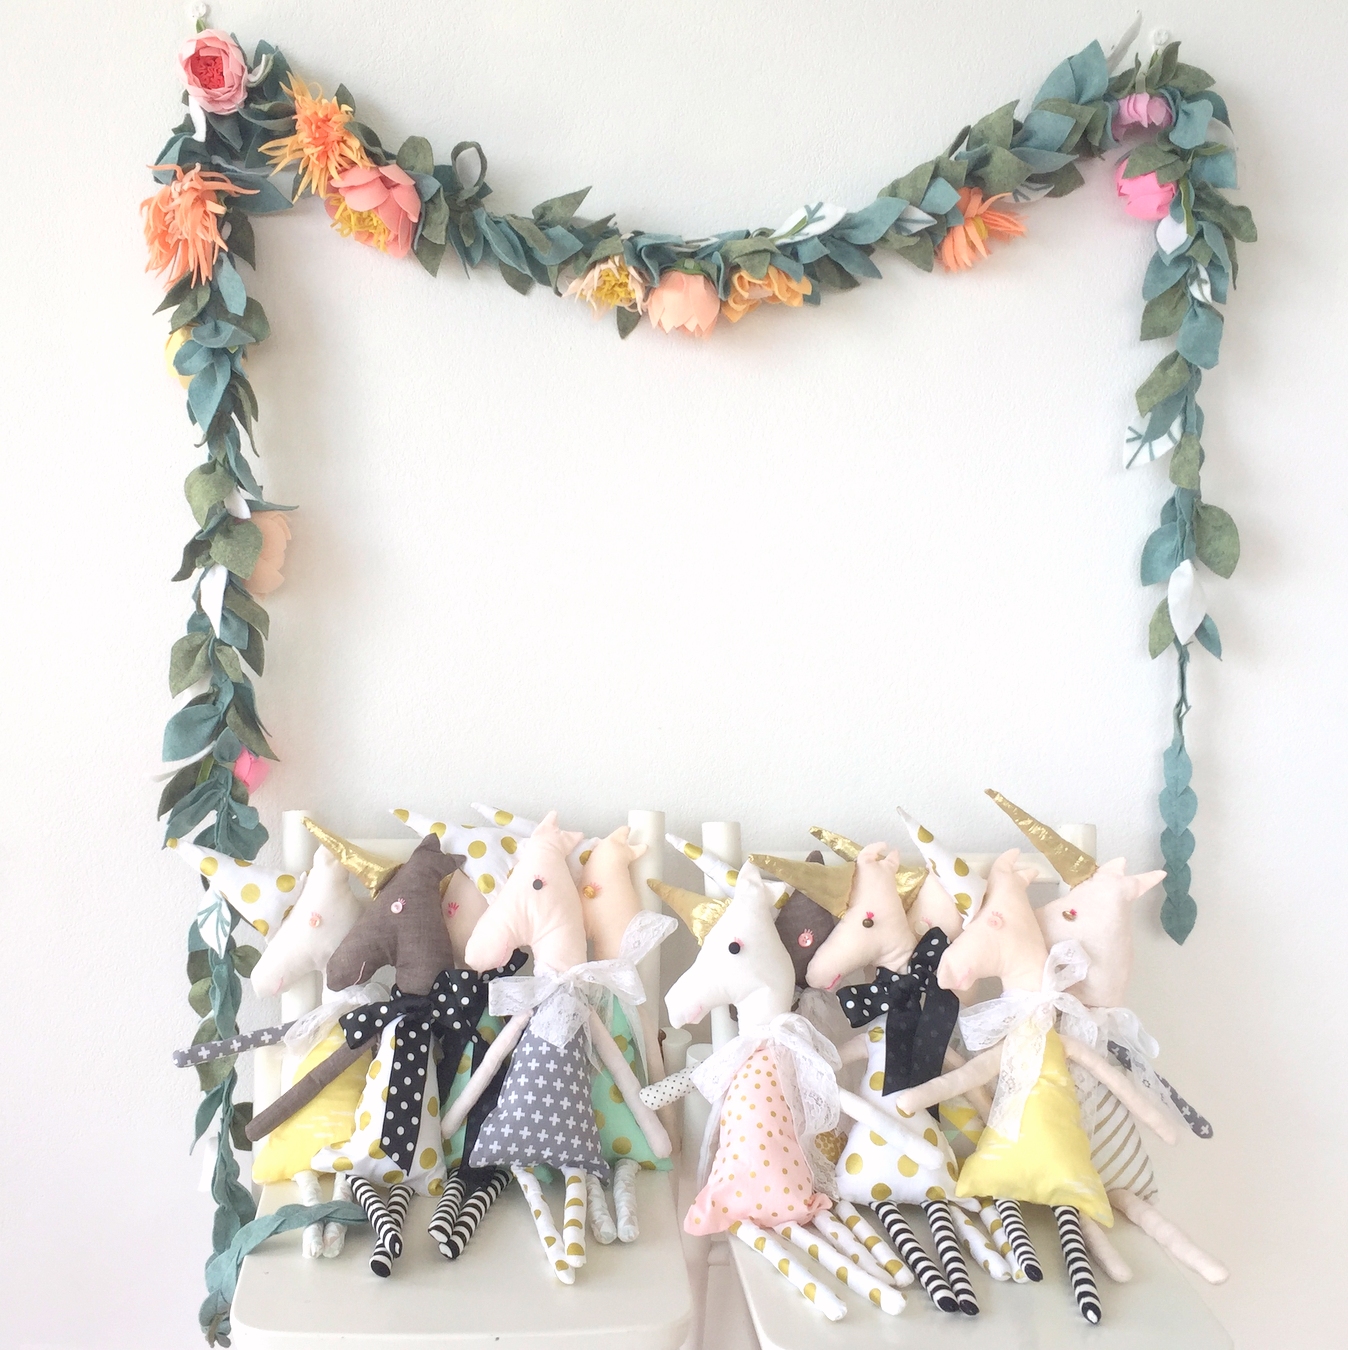 a whole pile of handmade unicorns (and the most beautiful felt floral garland!)